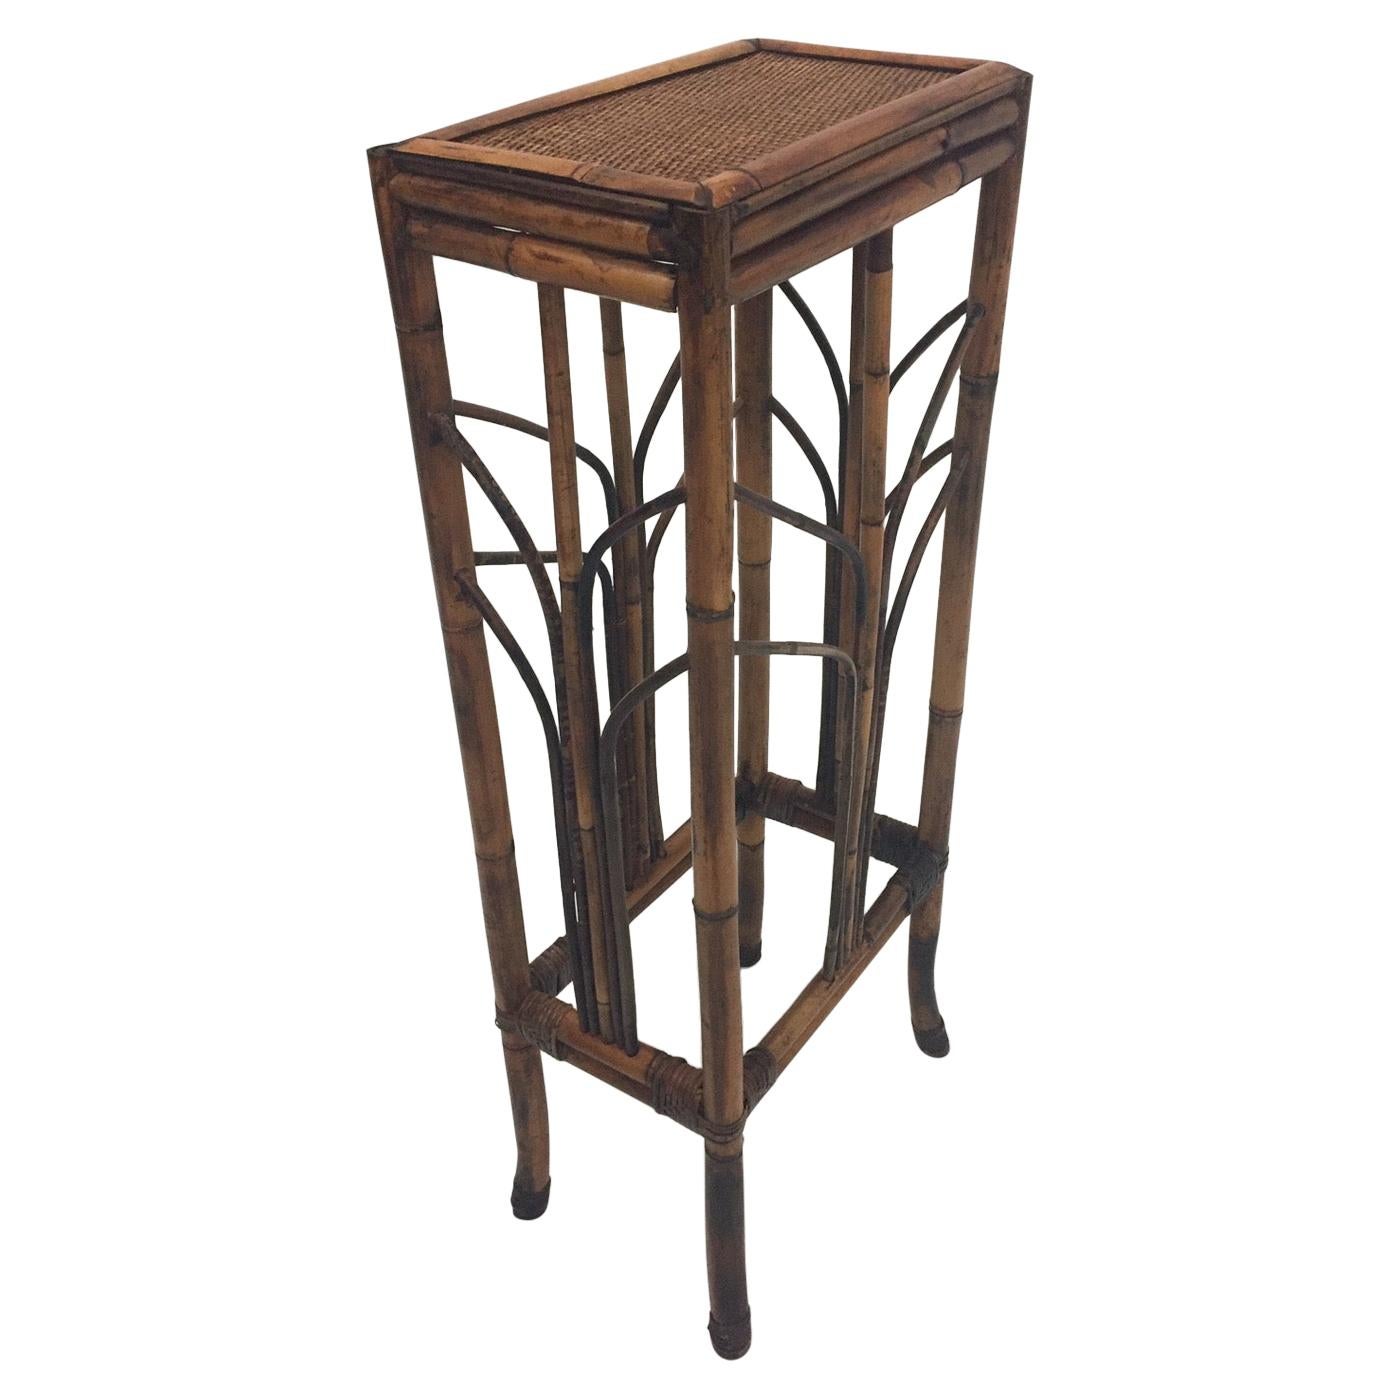 Classic Vintage Tall Bamboo Pedestal For Sale